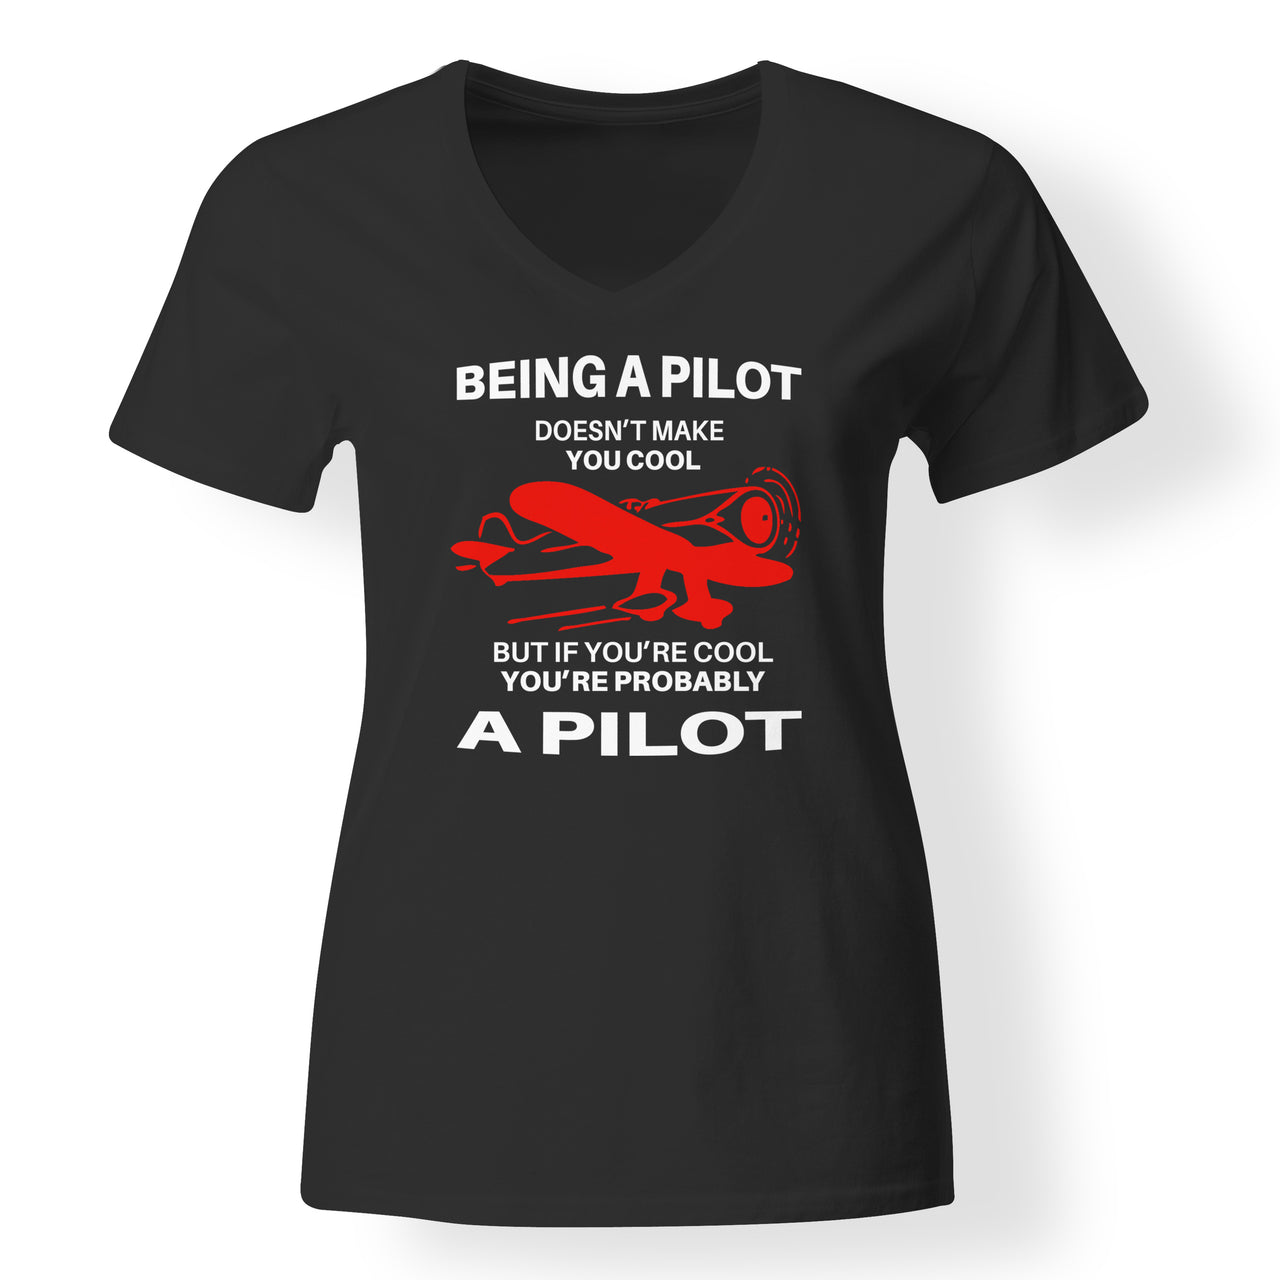 If You're Cool You're Probably a Pilot Designed V-Neck T-Shirts